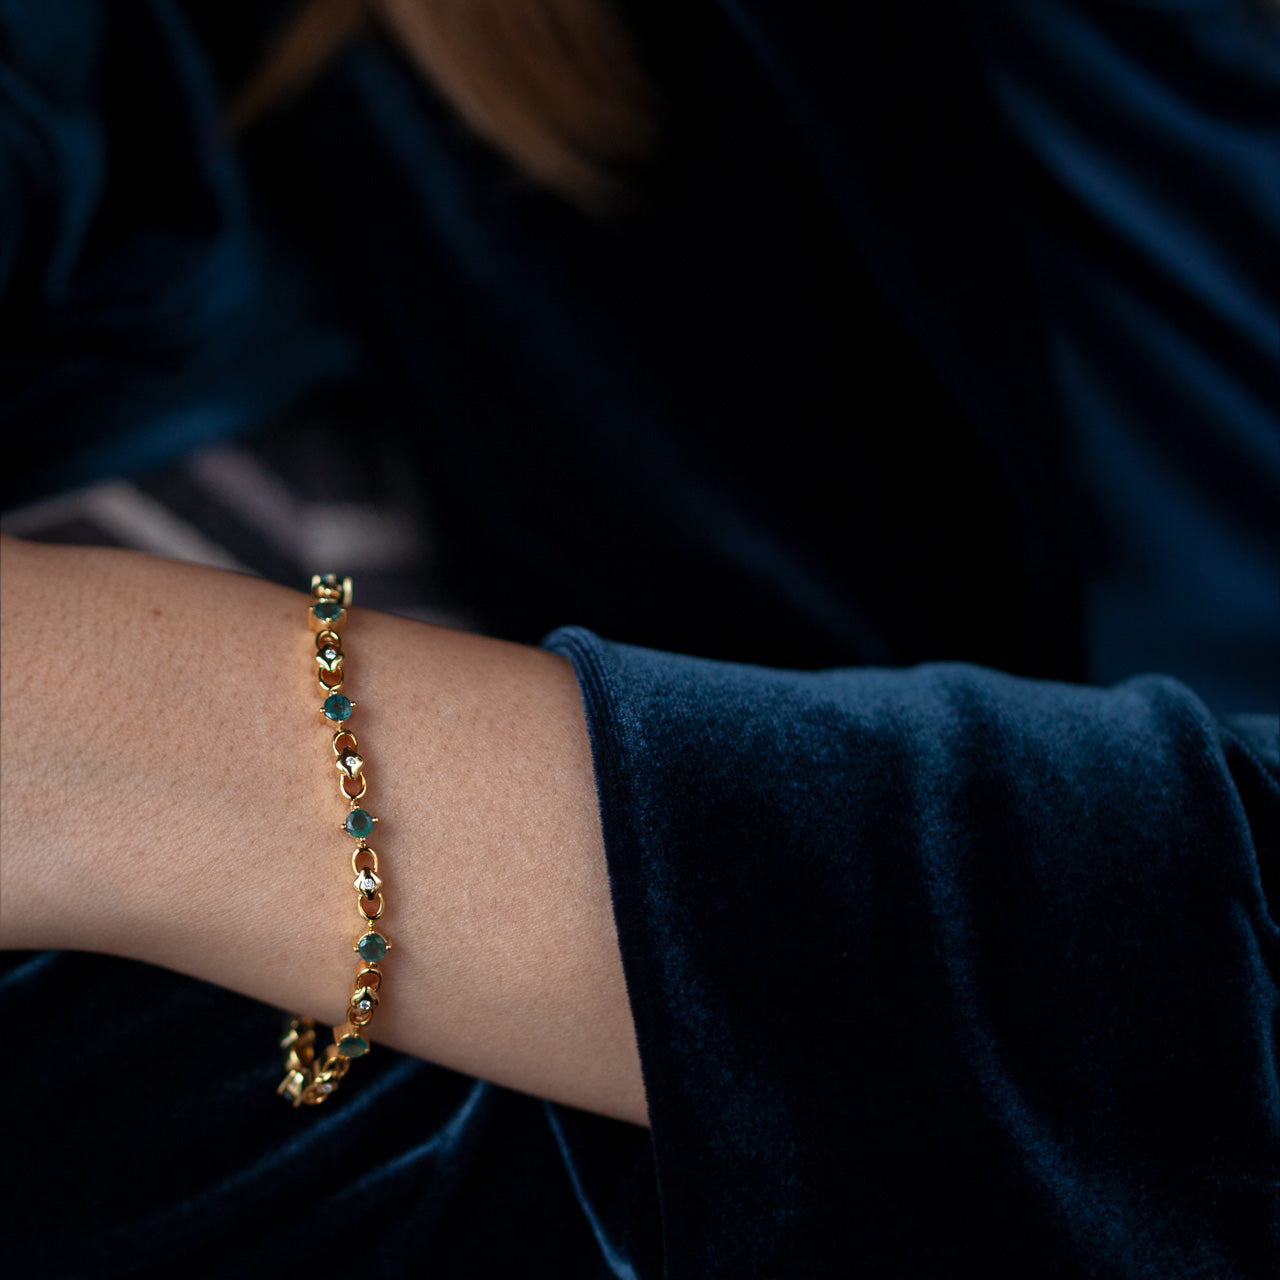 A woman's wrist adorned with the luxurious 3.00ctw natural alexandrite 18k yellow gold bracelet, complemented by her blue velvet attire